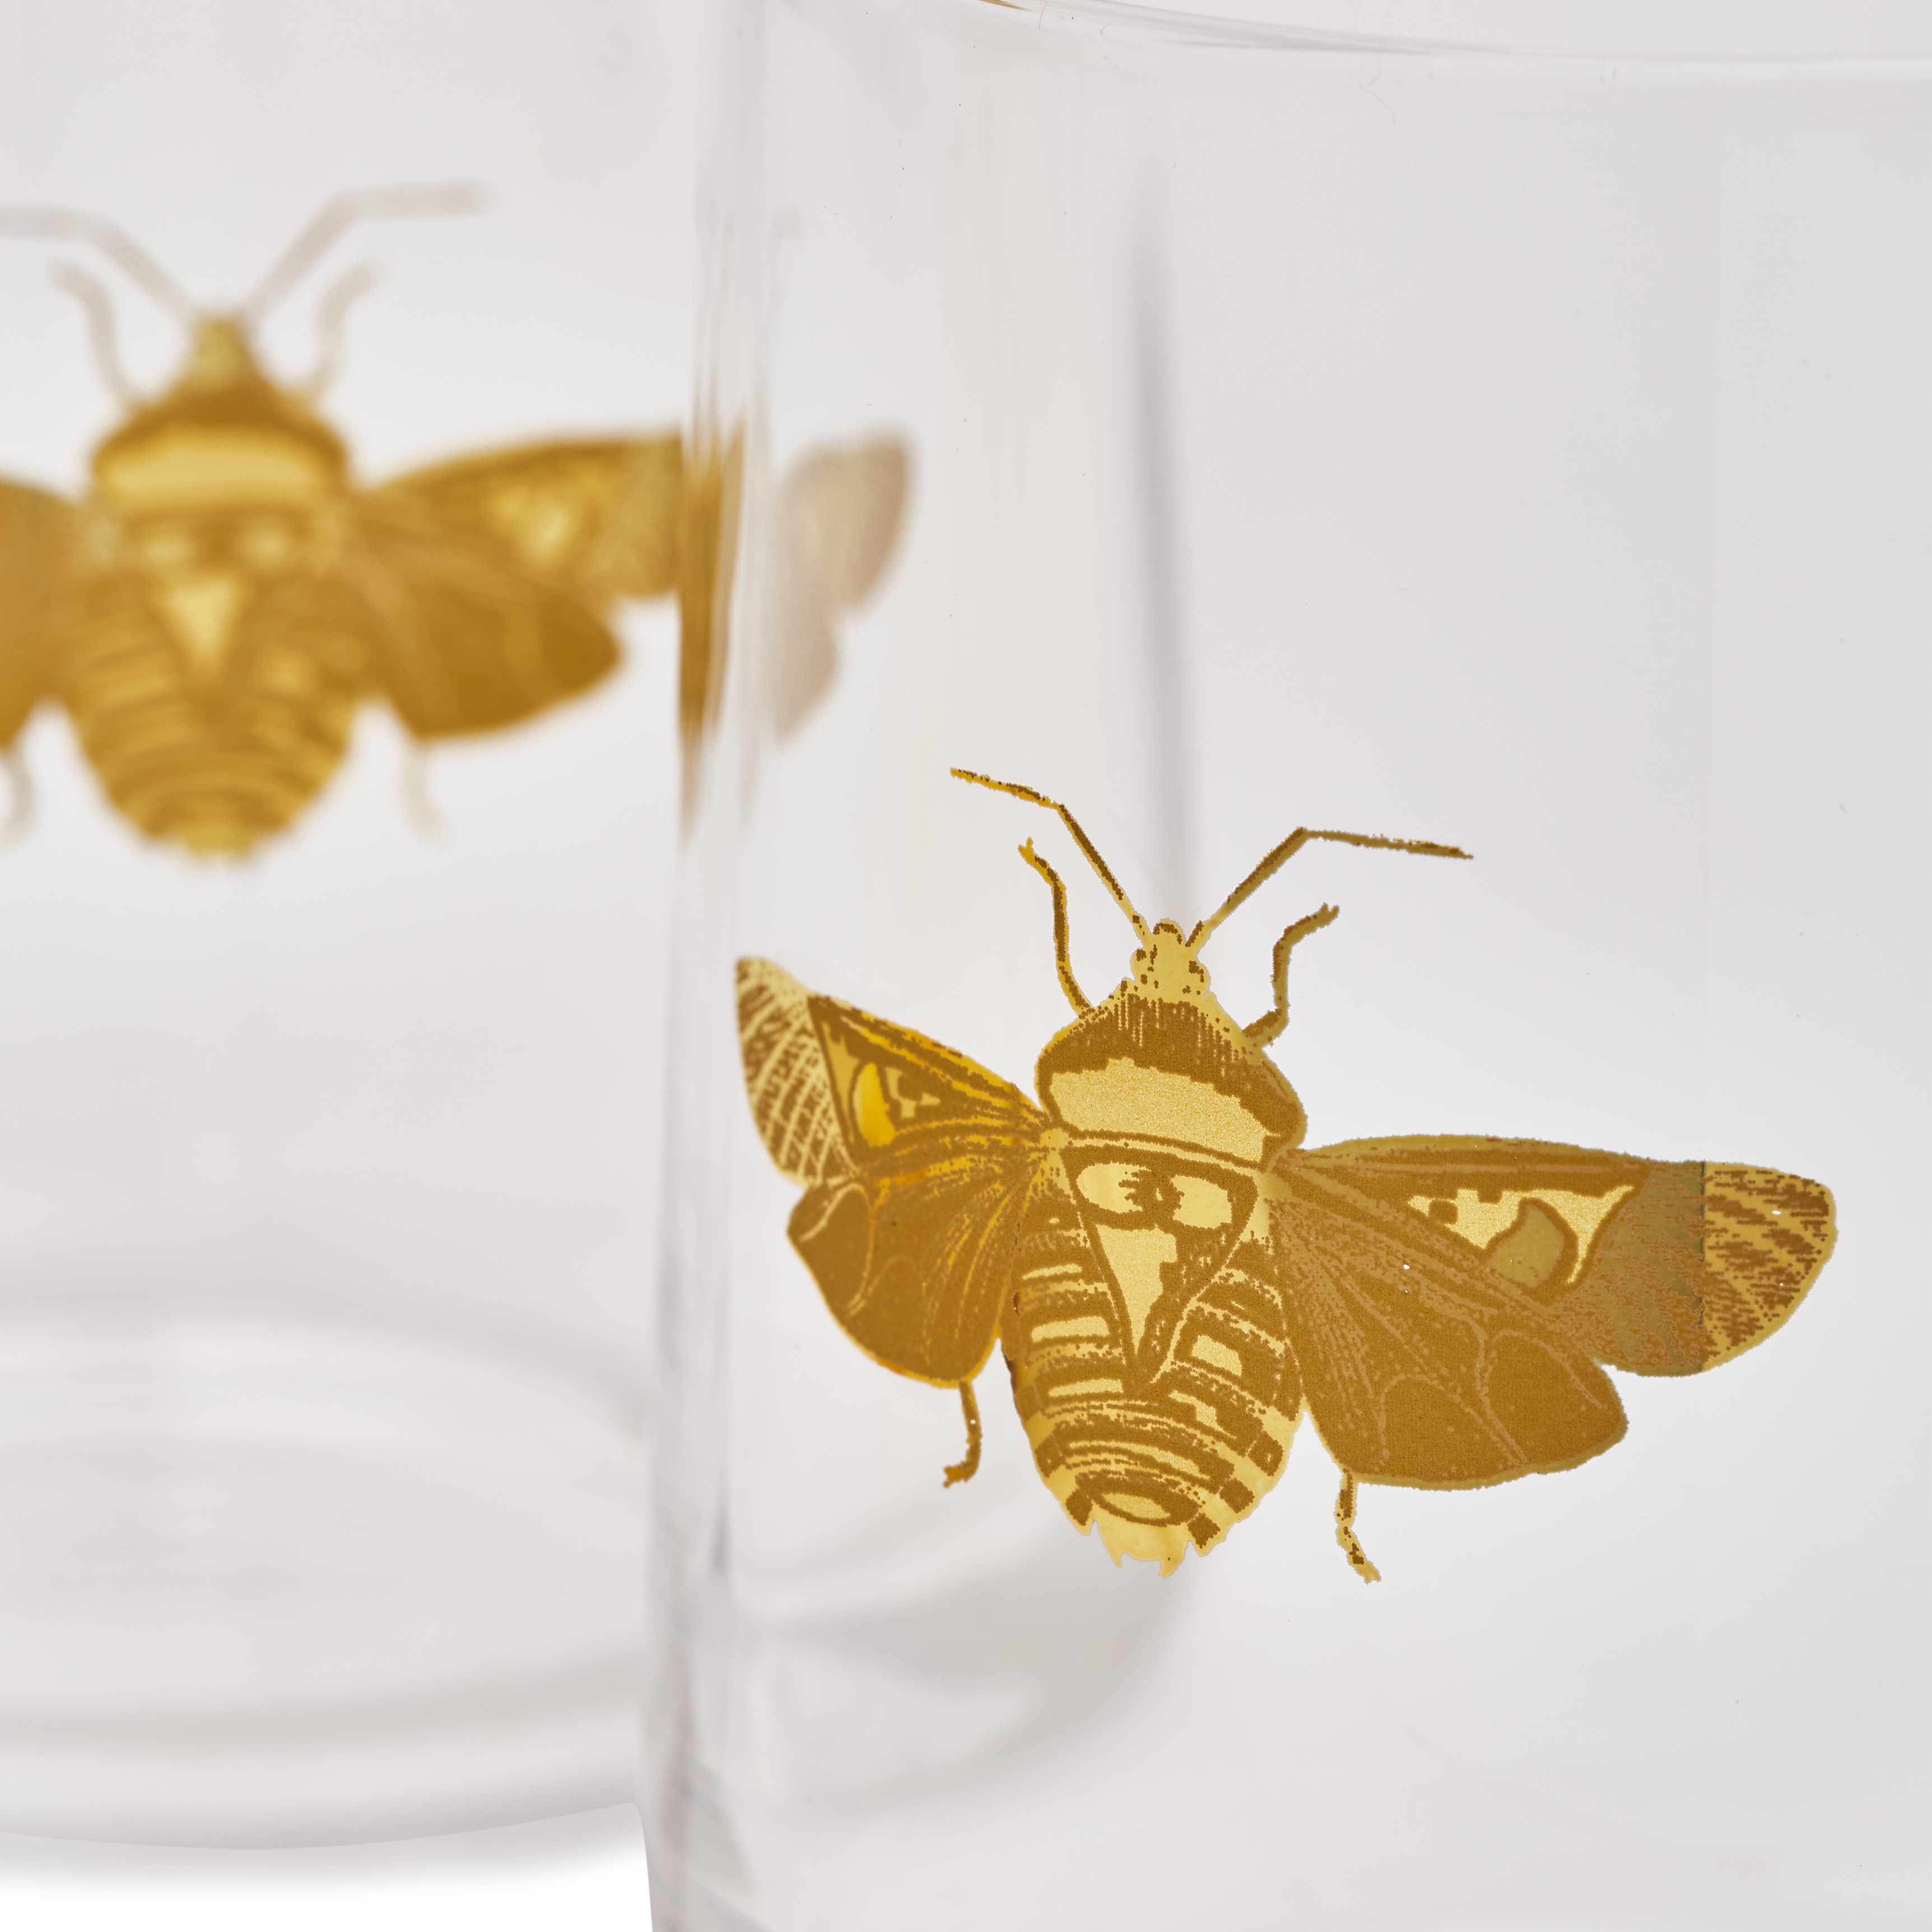 Creatures of Curiosity Highball Glass Set image number null